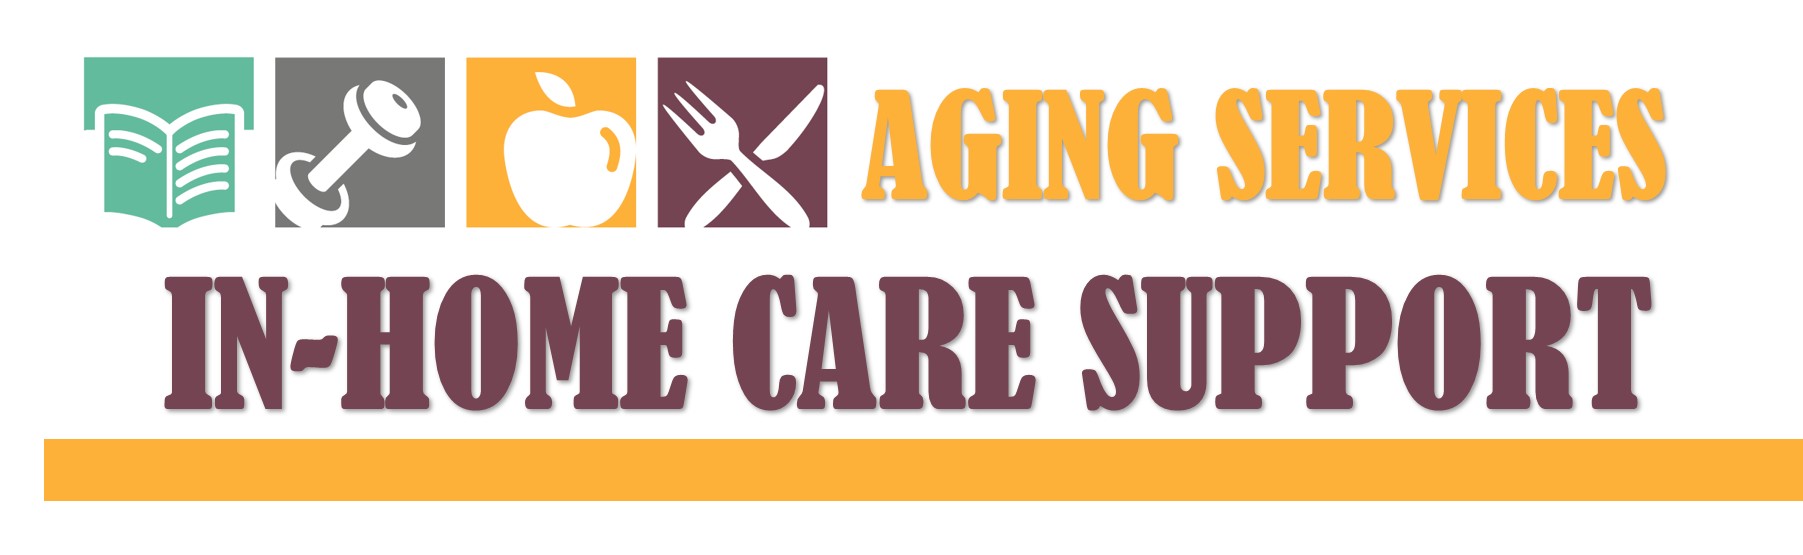 in home care support